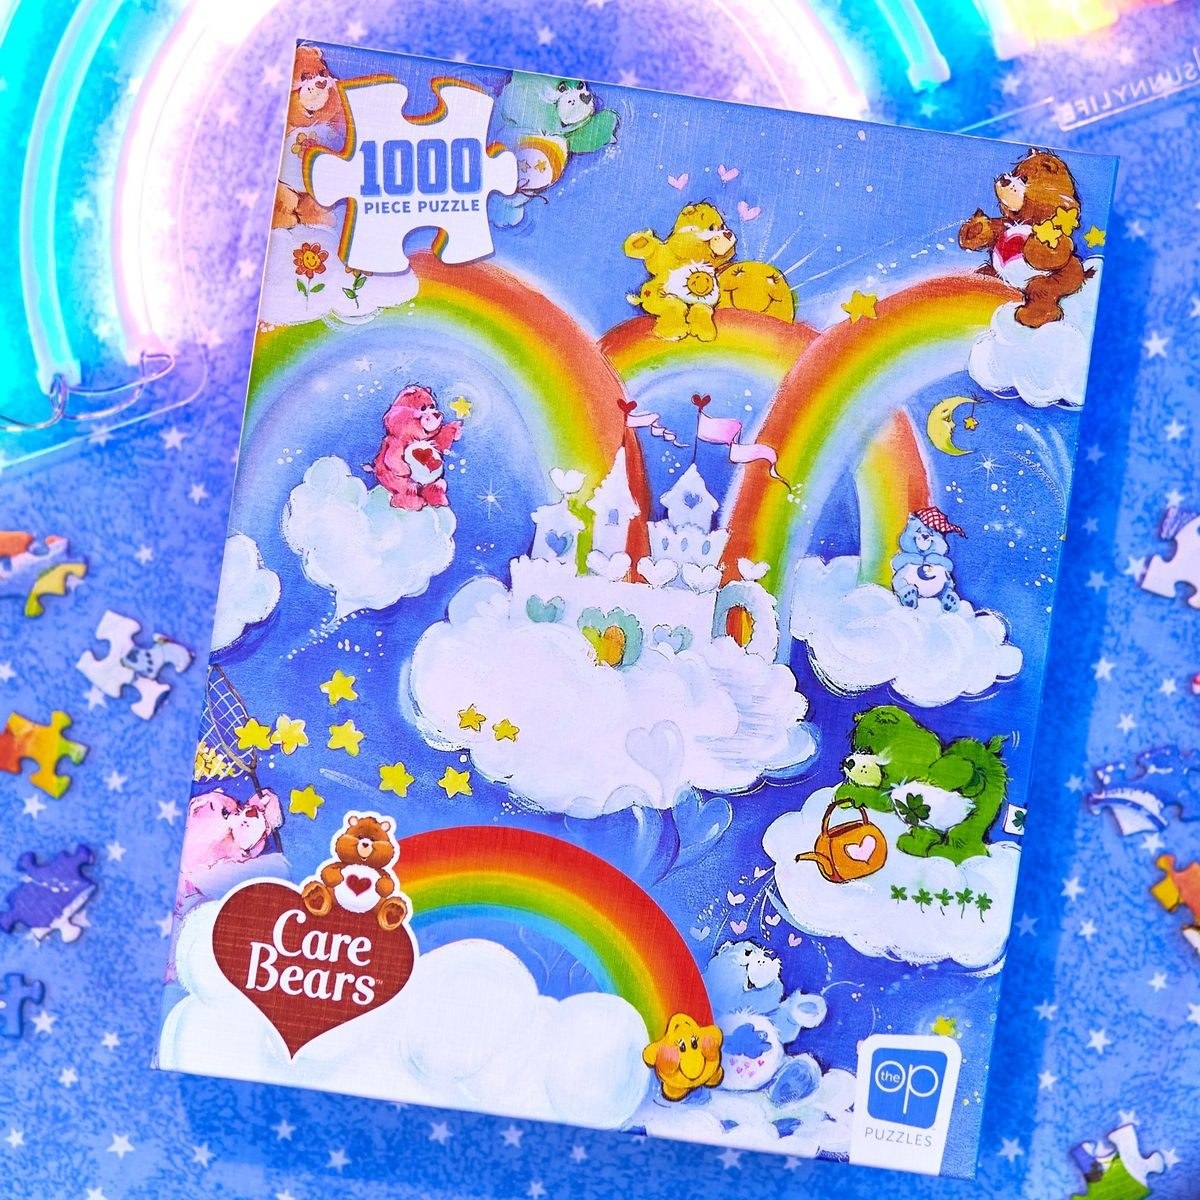 the care bears puzzle